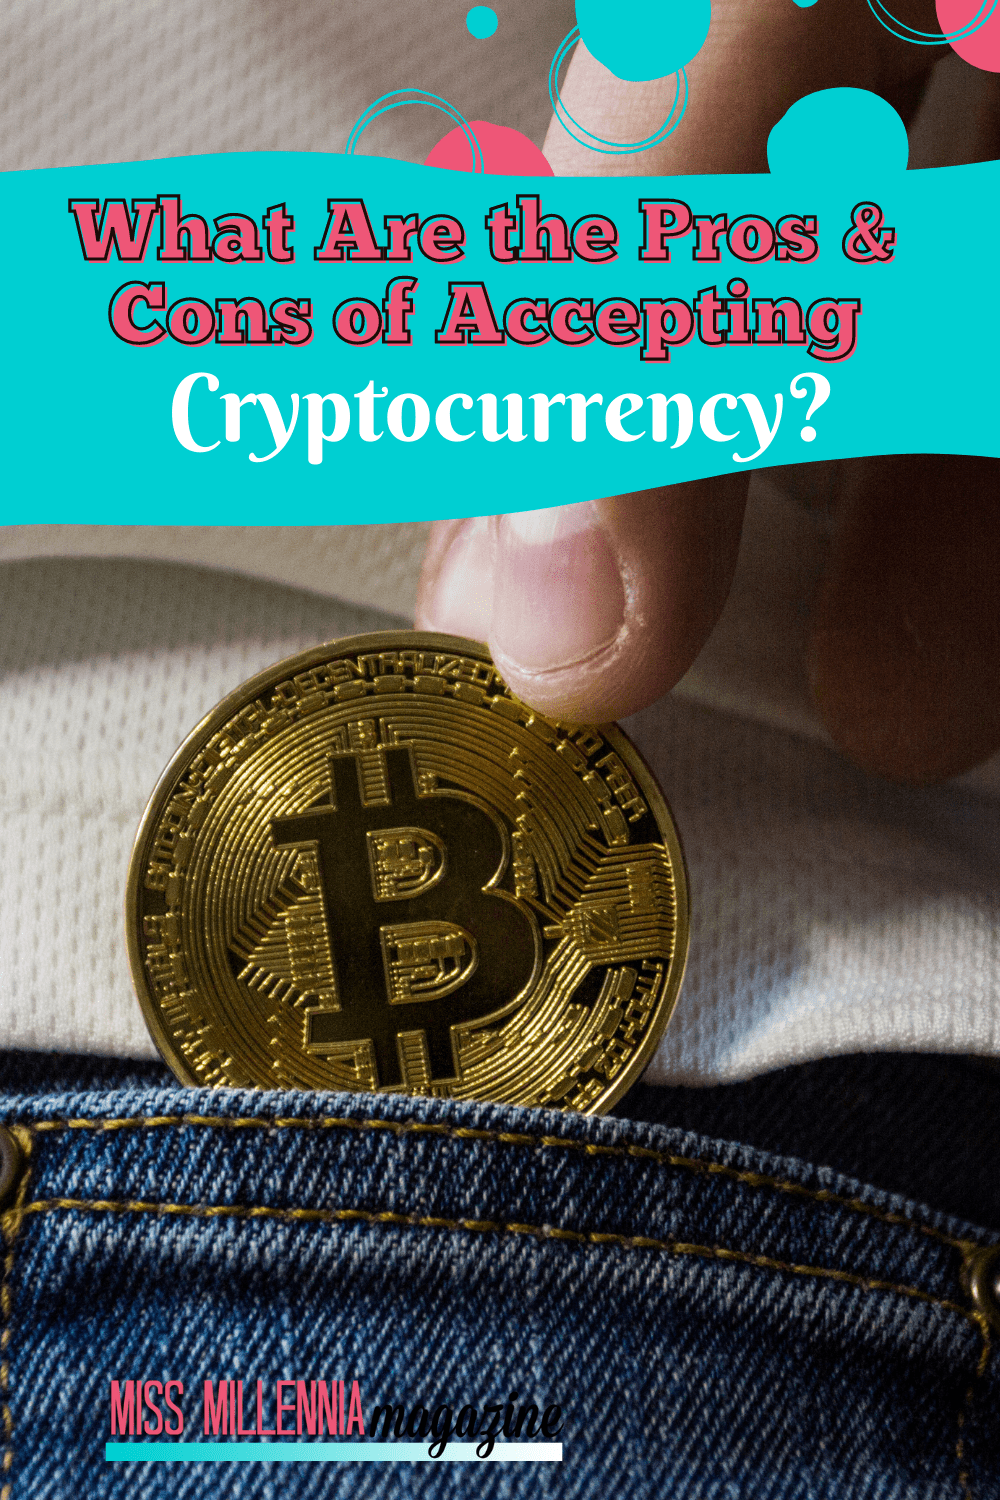 What Are the Pros & Cons of Accepting Cryptocurrency?